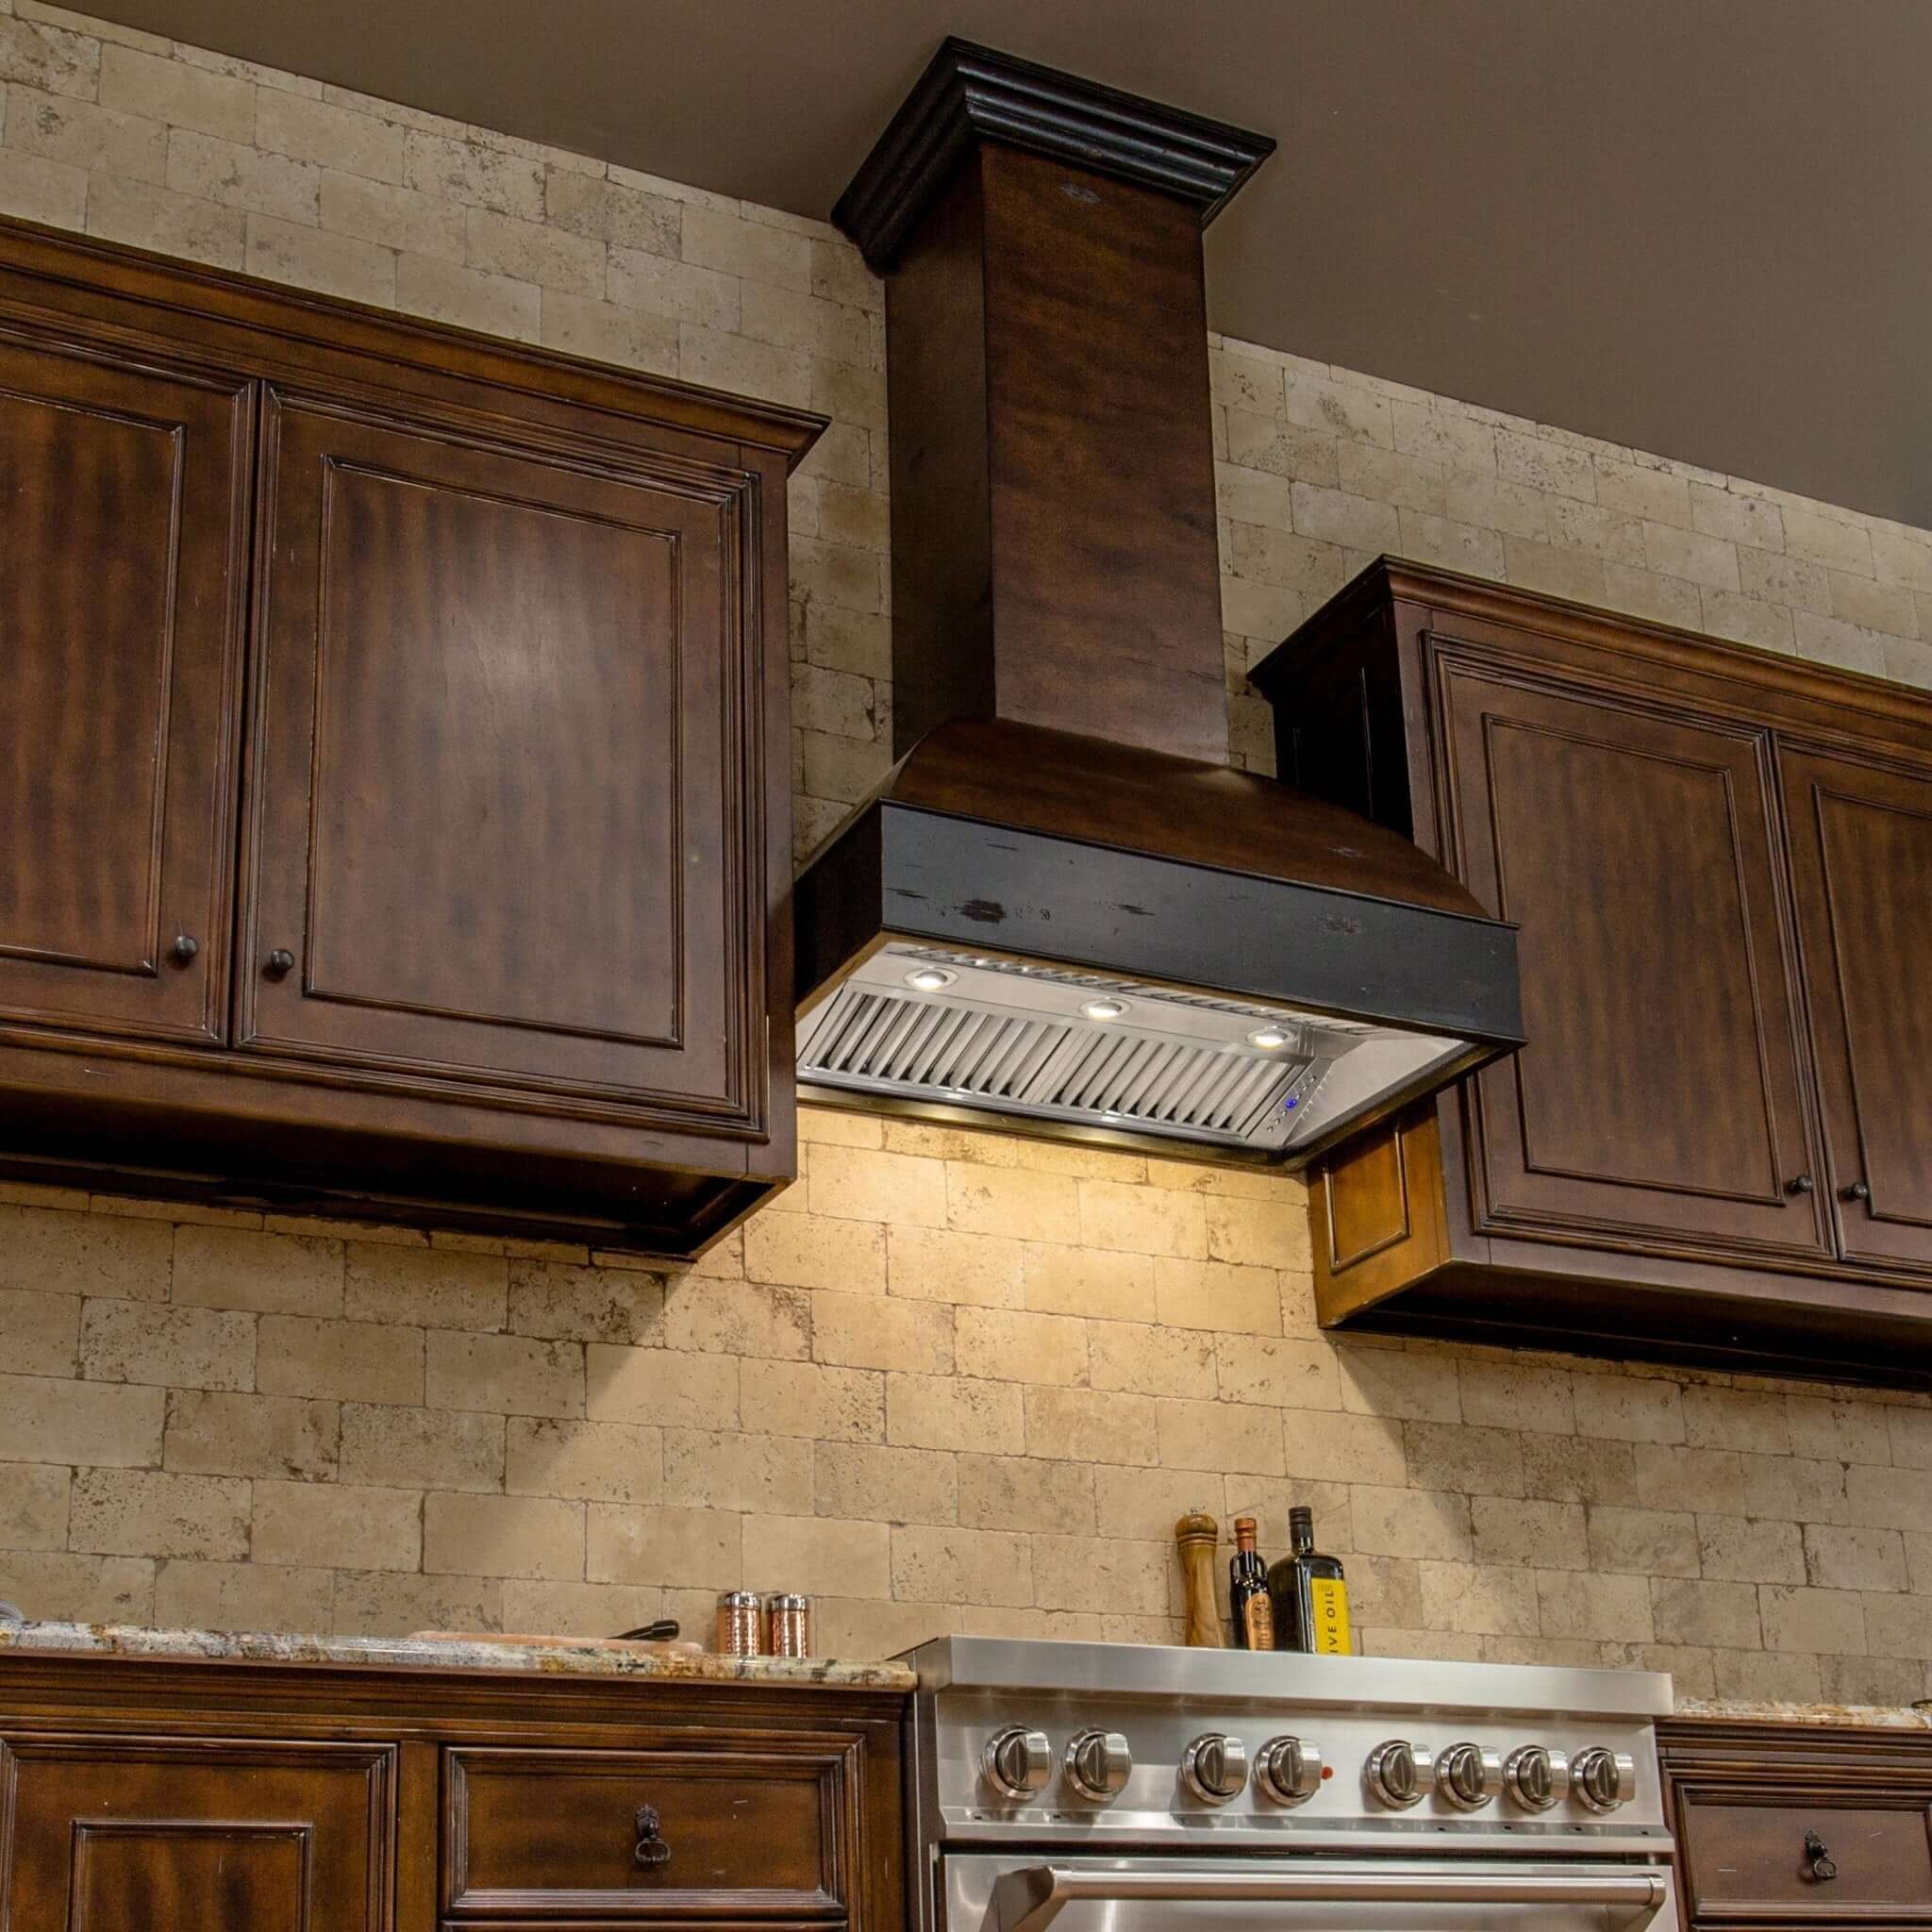 ZLINE 36 in. Wooden Wall Mount Range Hood in Antigua and Walnut (369AW-36) in a rustic kitchen with matching cabinets.